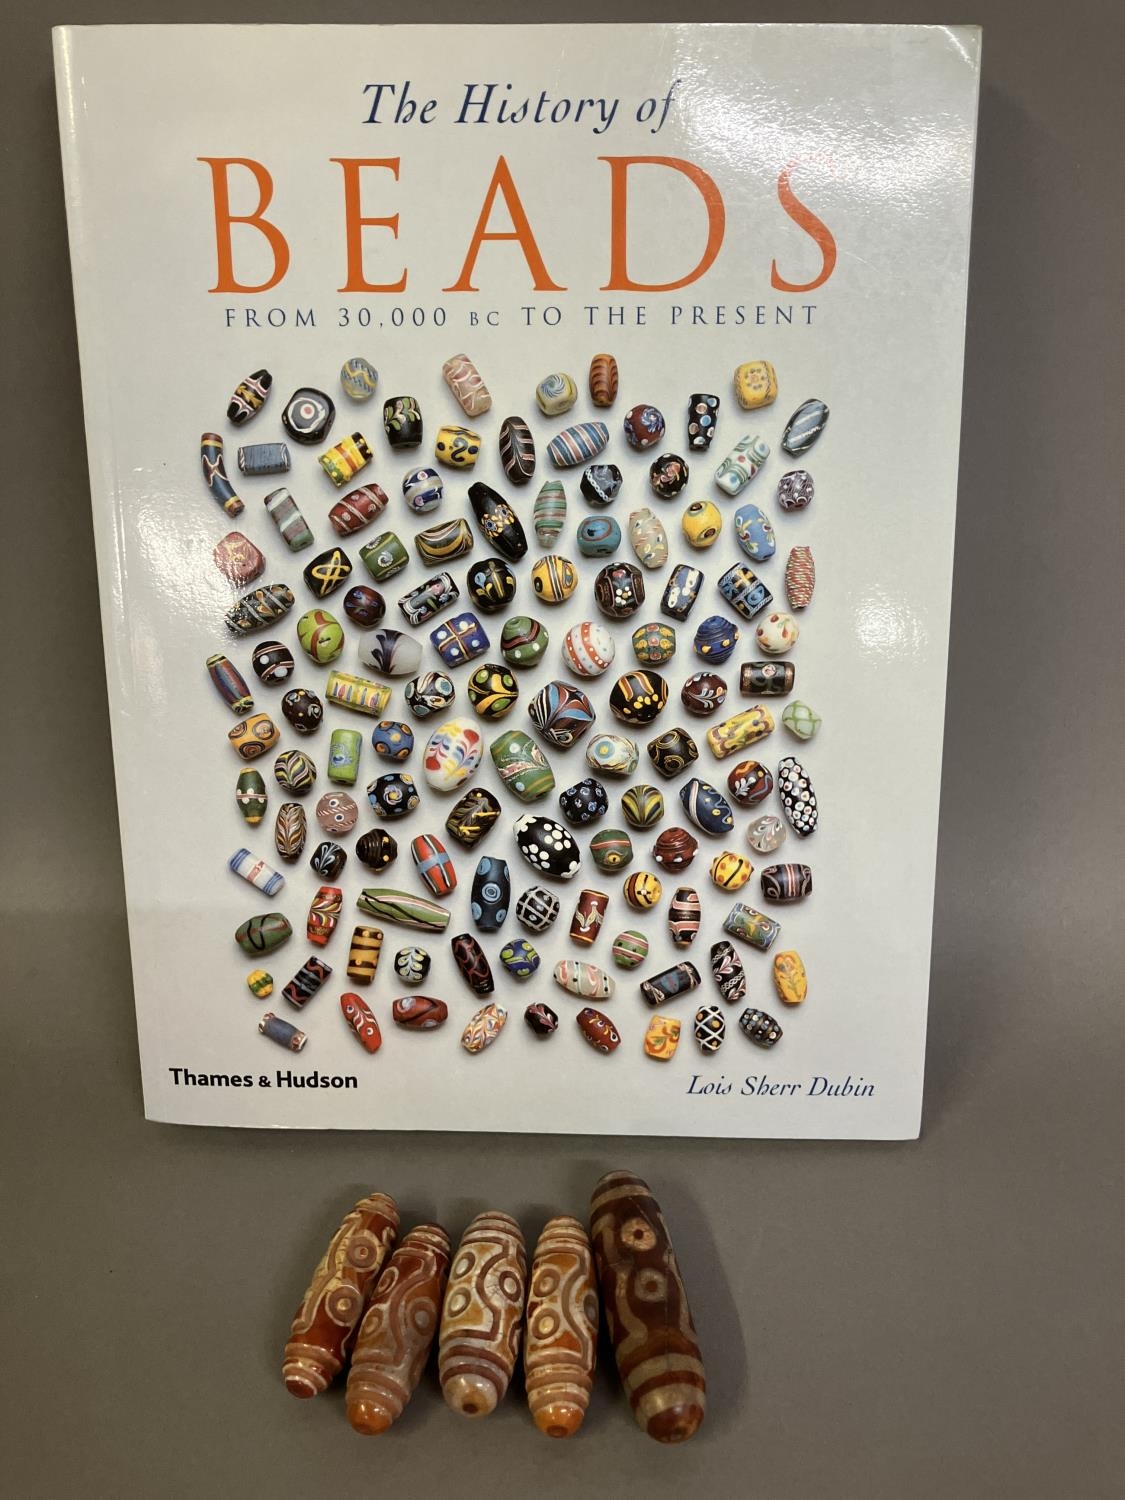 Trade beads: Six large beads with eyes, four very similar with the work in relief and defined ridges